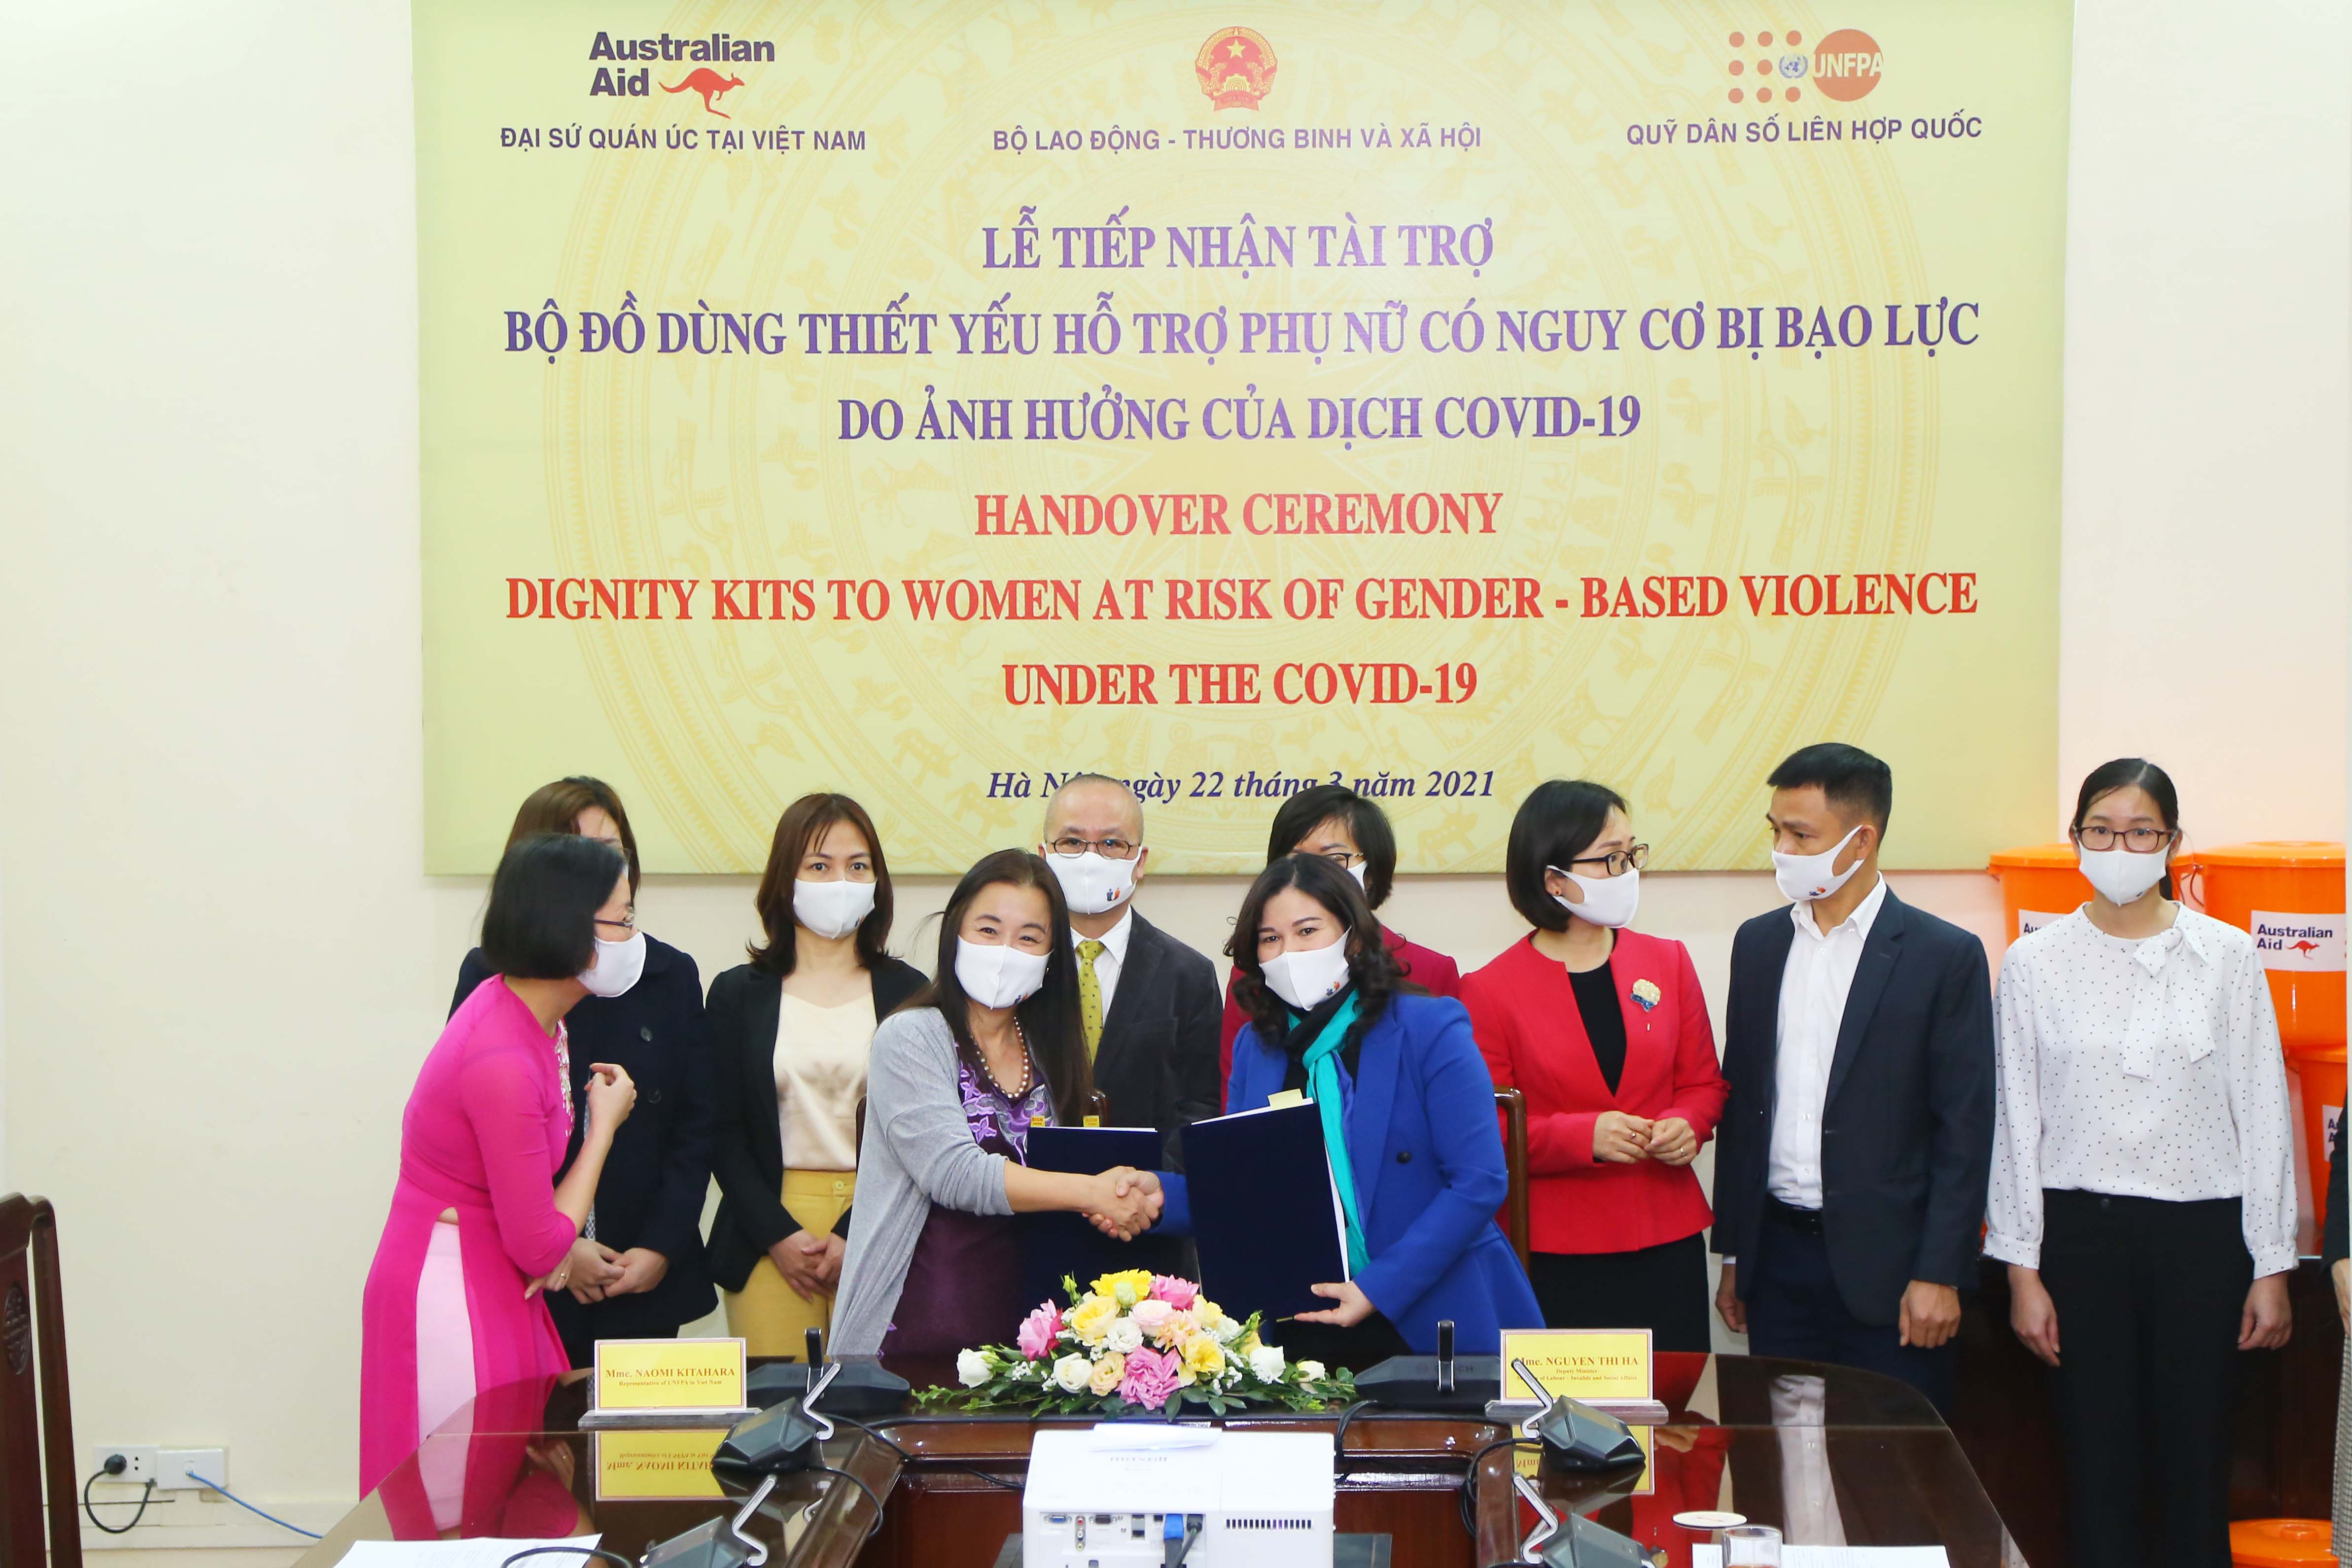 Handover ceremony dignity kits to women at risk of gender-based violence under the covid-19